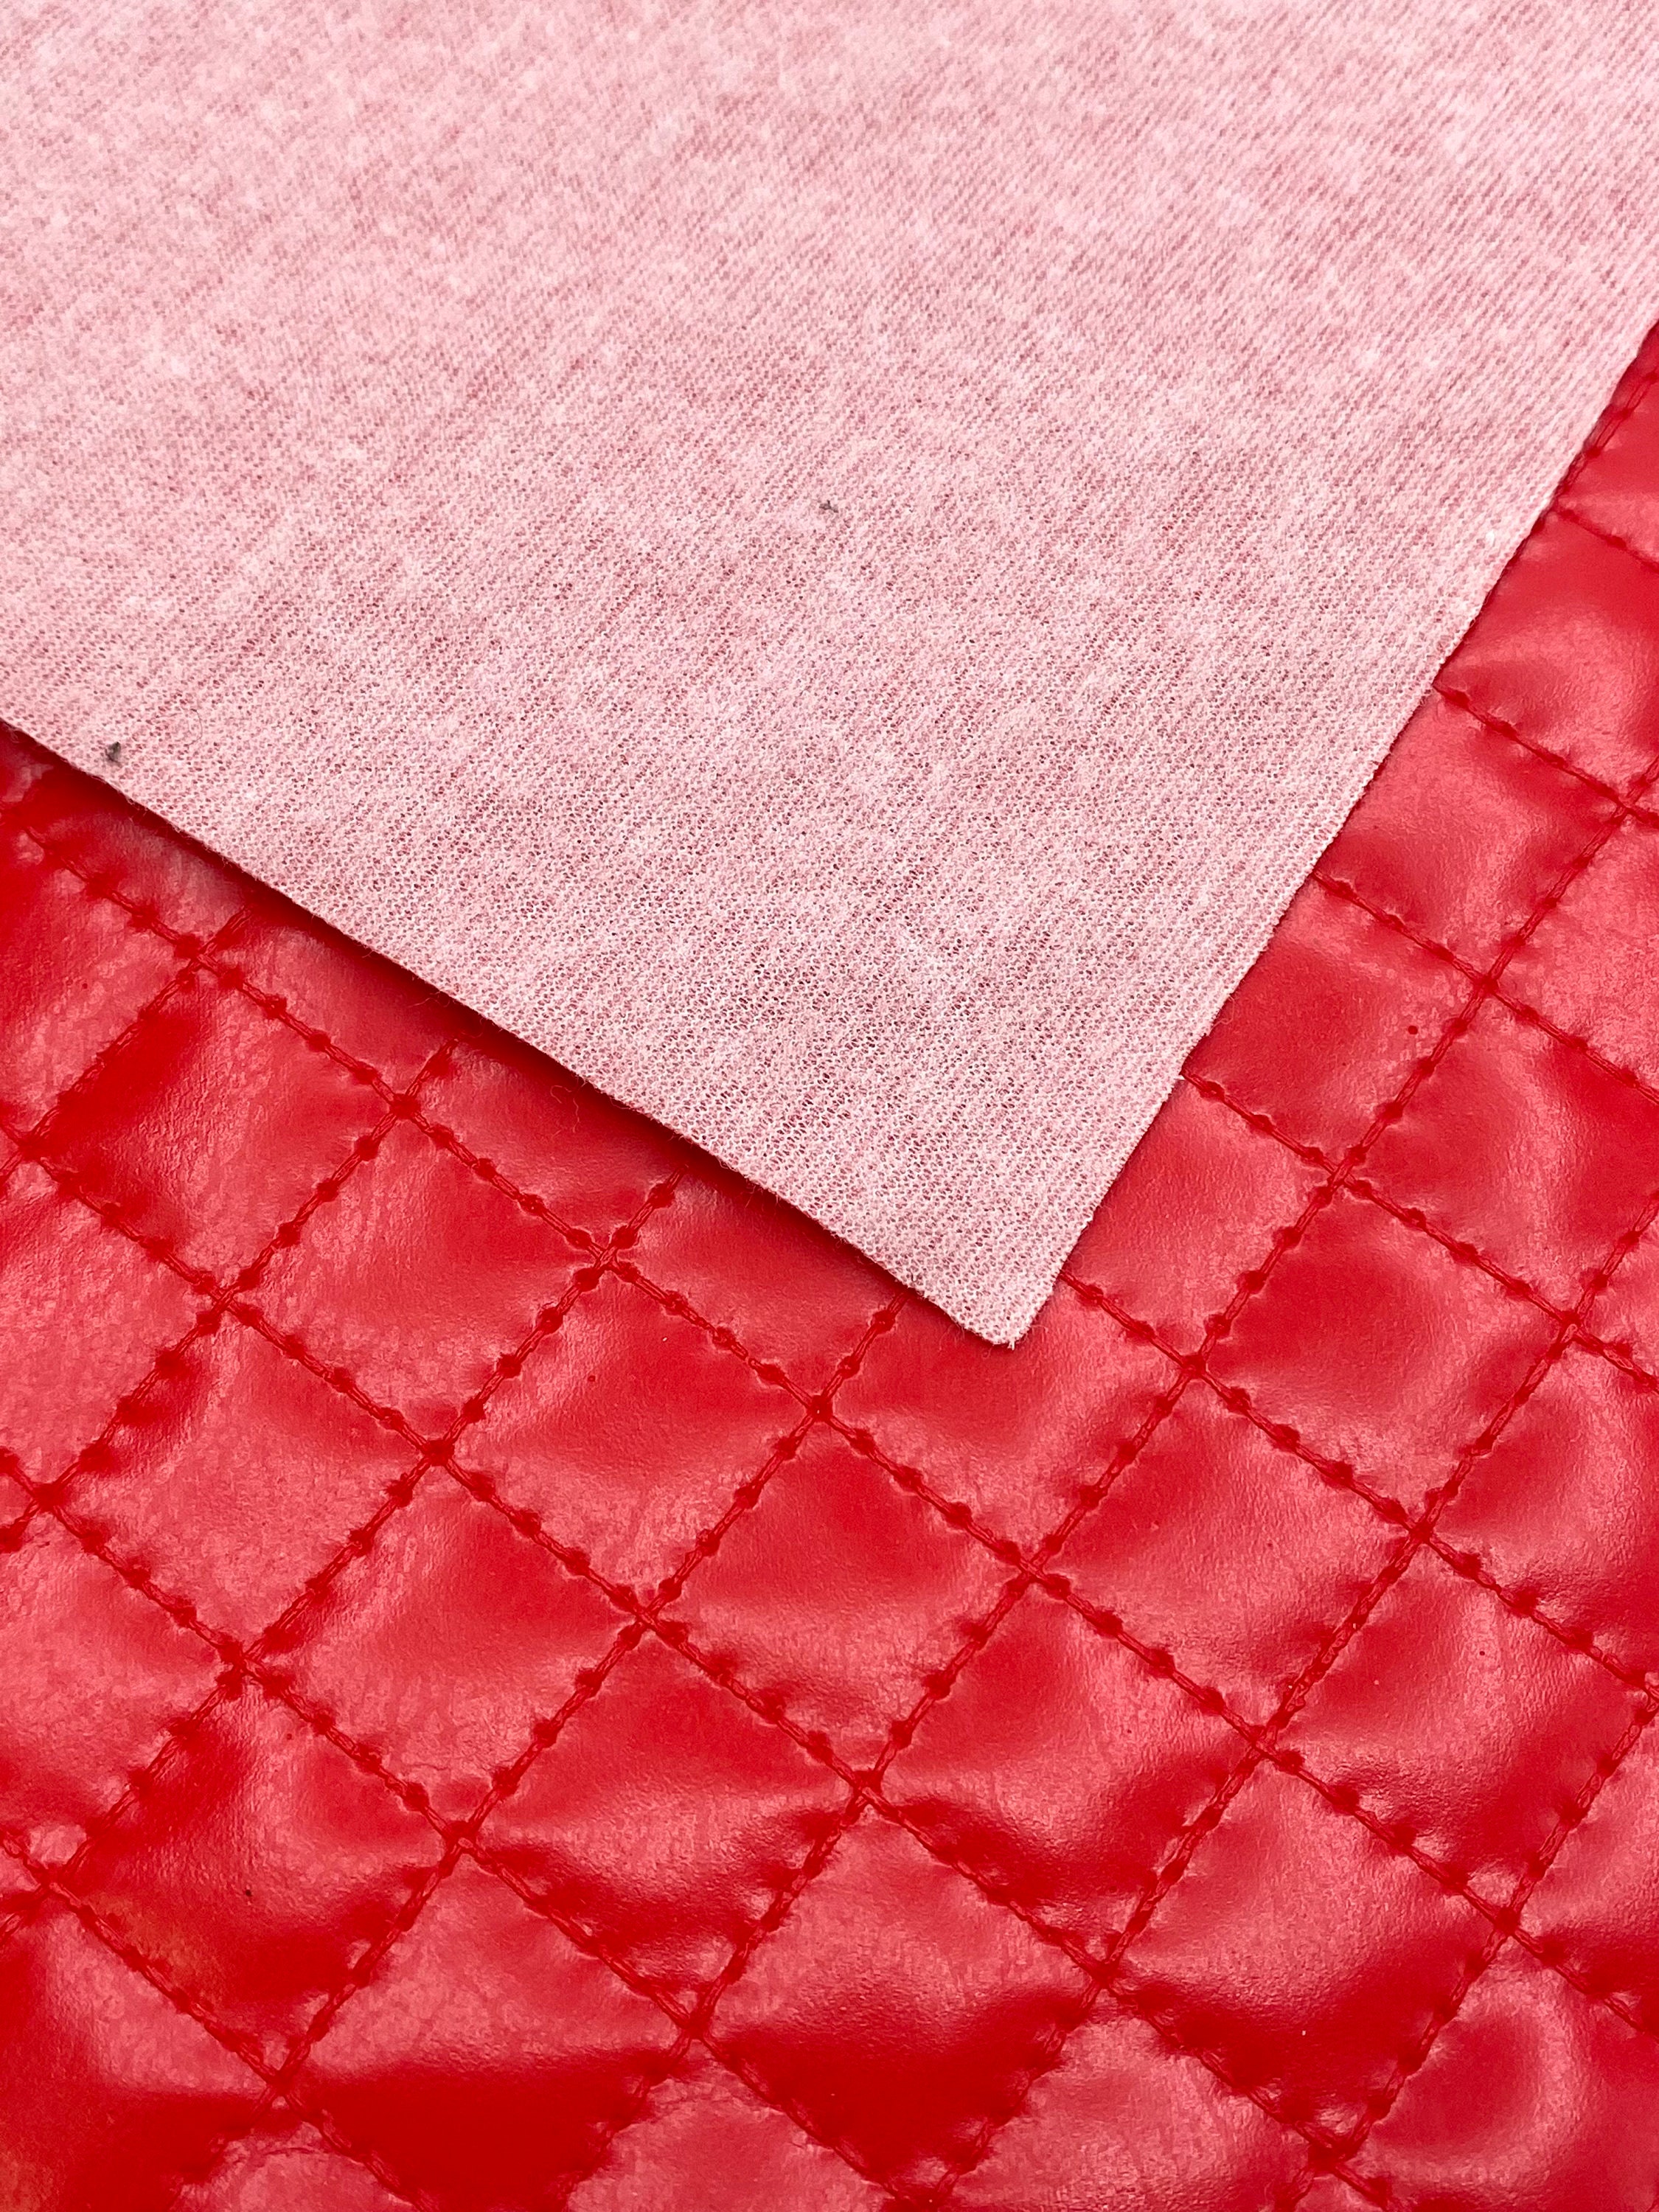 Red Diamond Quilted Solid Faux Leather Sheets, Synthetic Vinyl Fabric, Hair  Bow Material, DIY Earrings Supplies, 1/2 or Full Sheet 